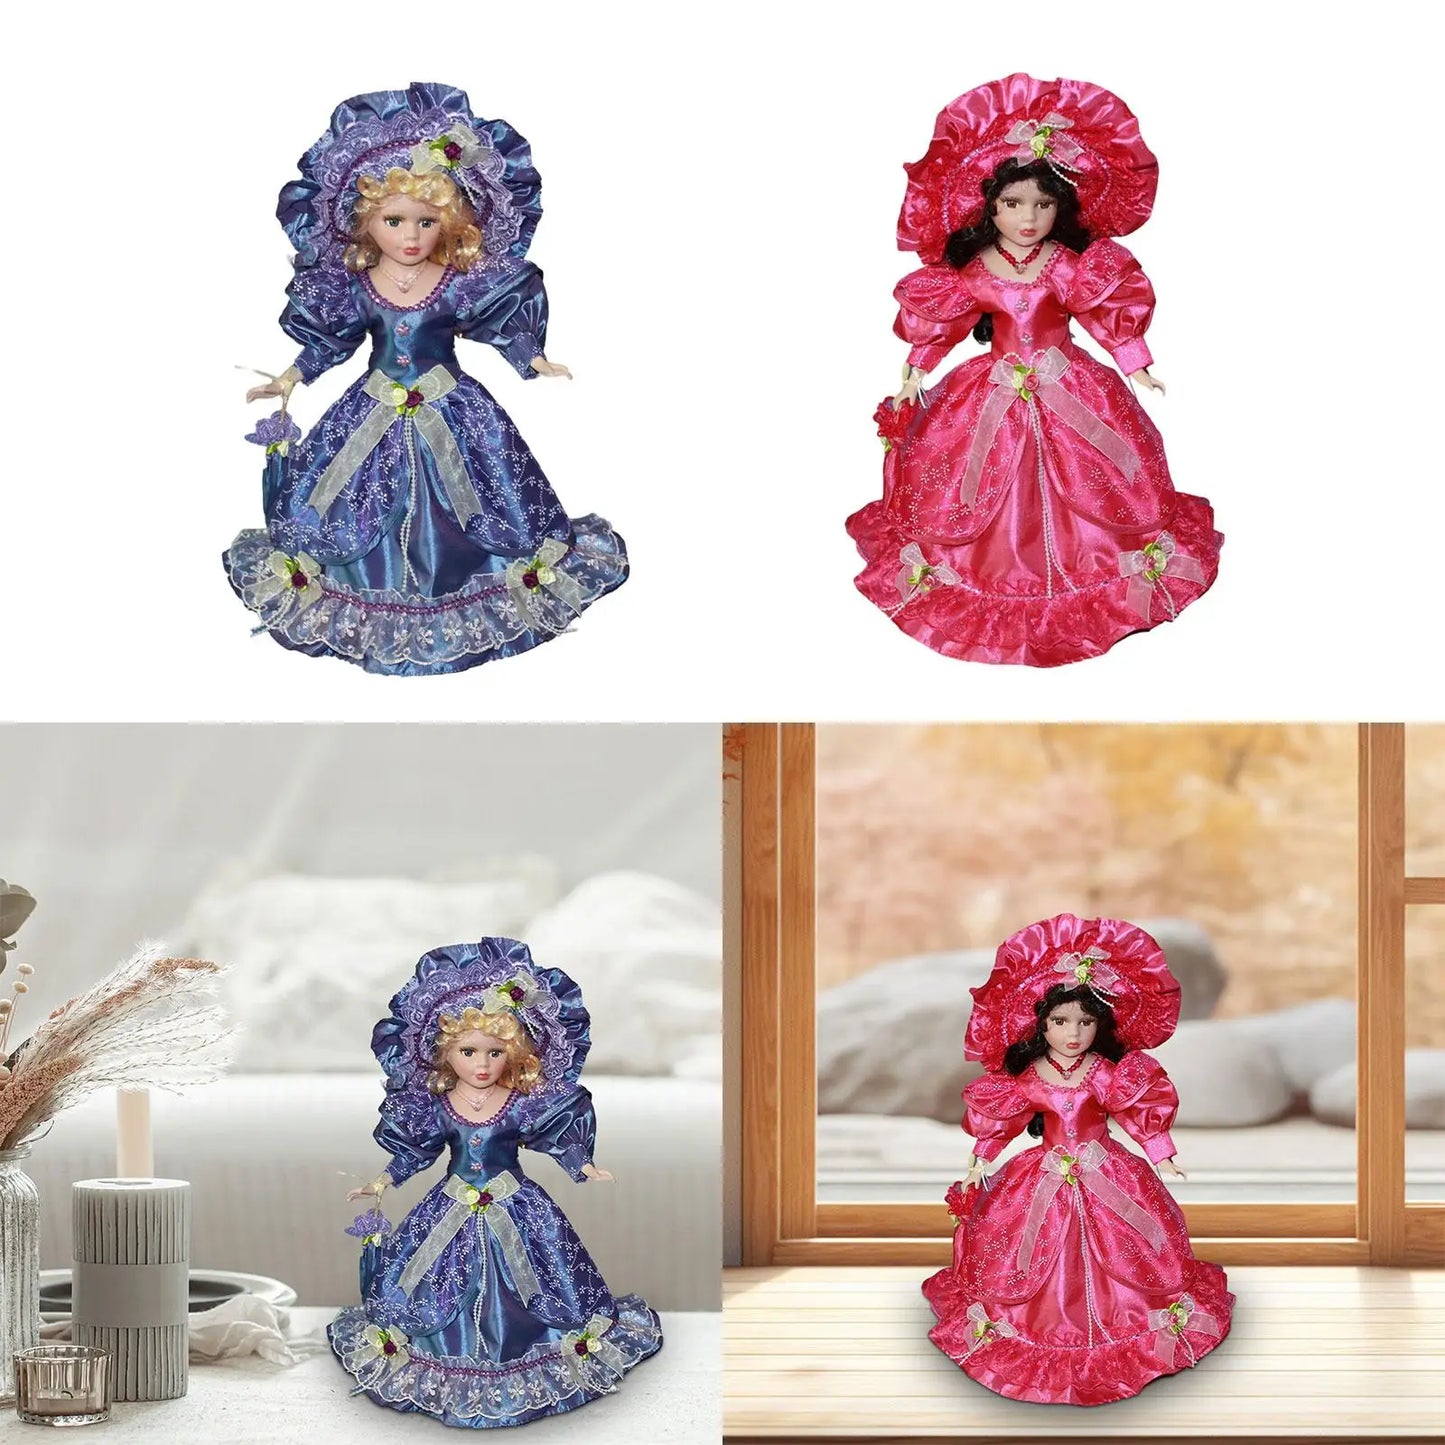 Dollhouse Lady with Dress with Skirt Hat 40cm Miniature Porcelain Figures Ceramic Doll People Model for Girls Kids Birthday Gift